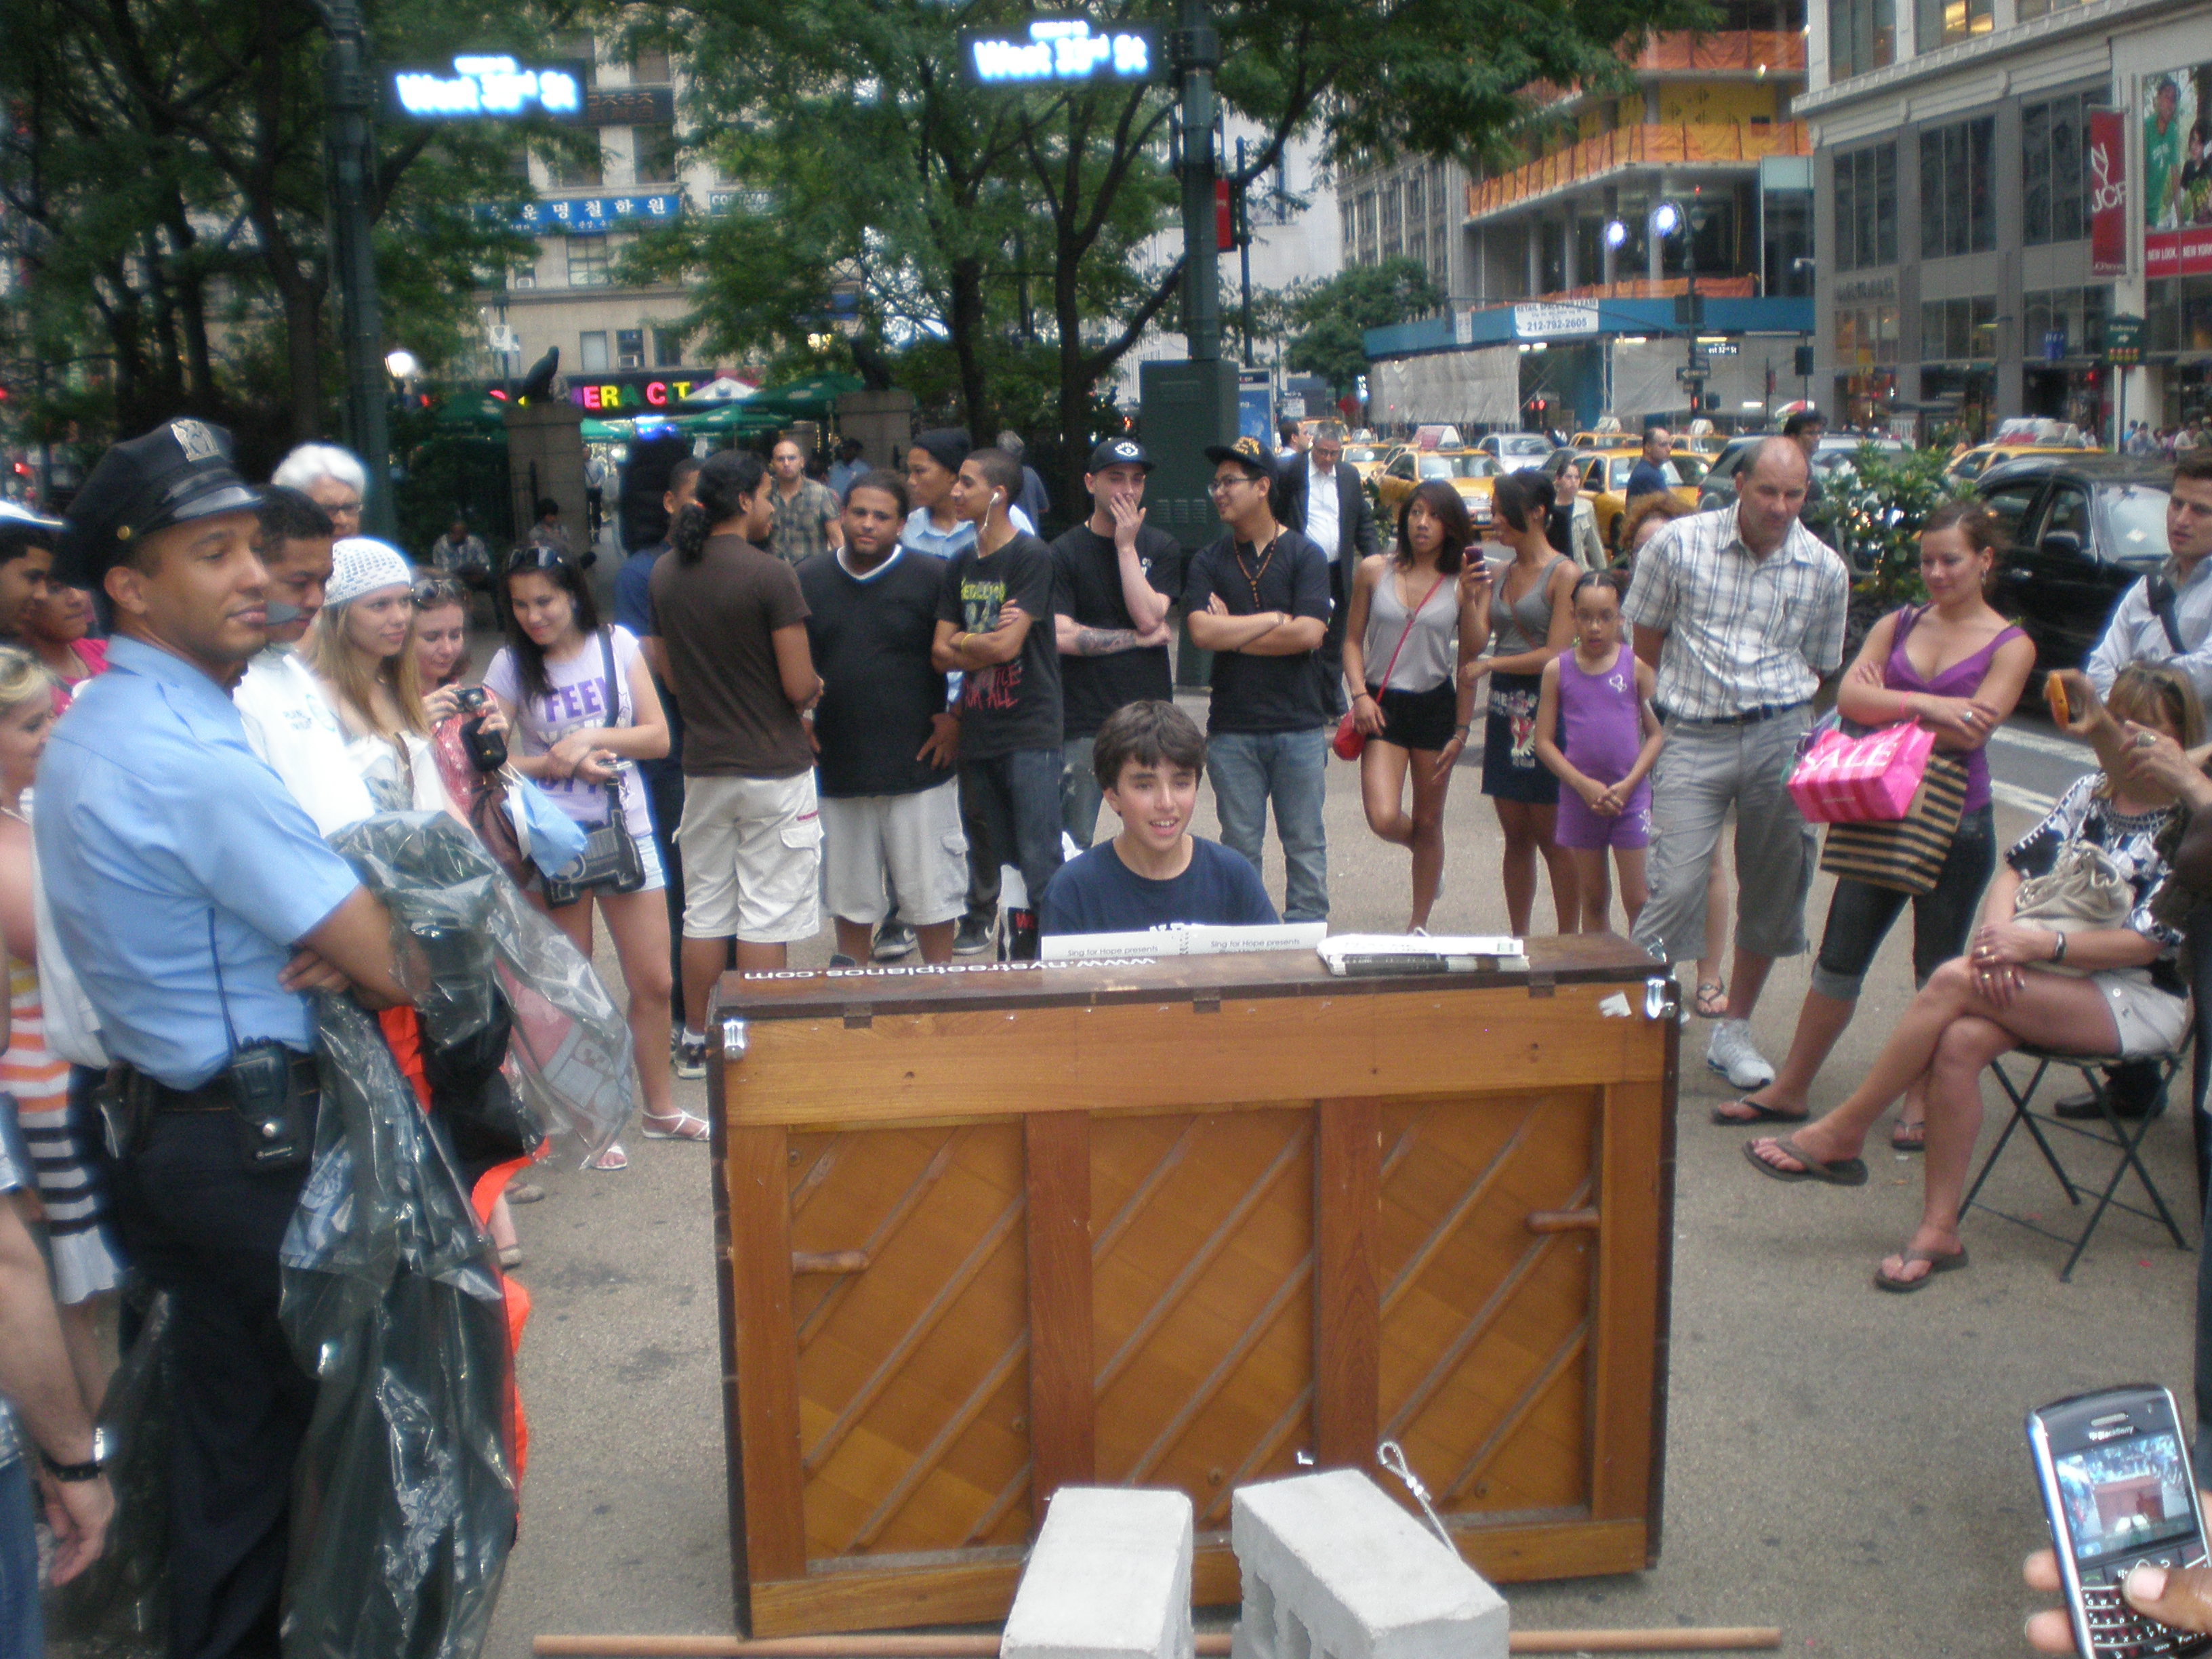 Christopher played piano and sang in Central Park, performed in Times Square and in front of Macys for the MMNY Festival 2010